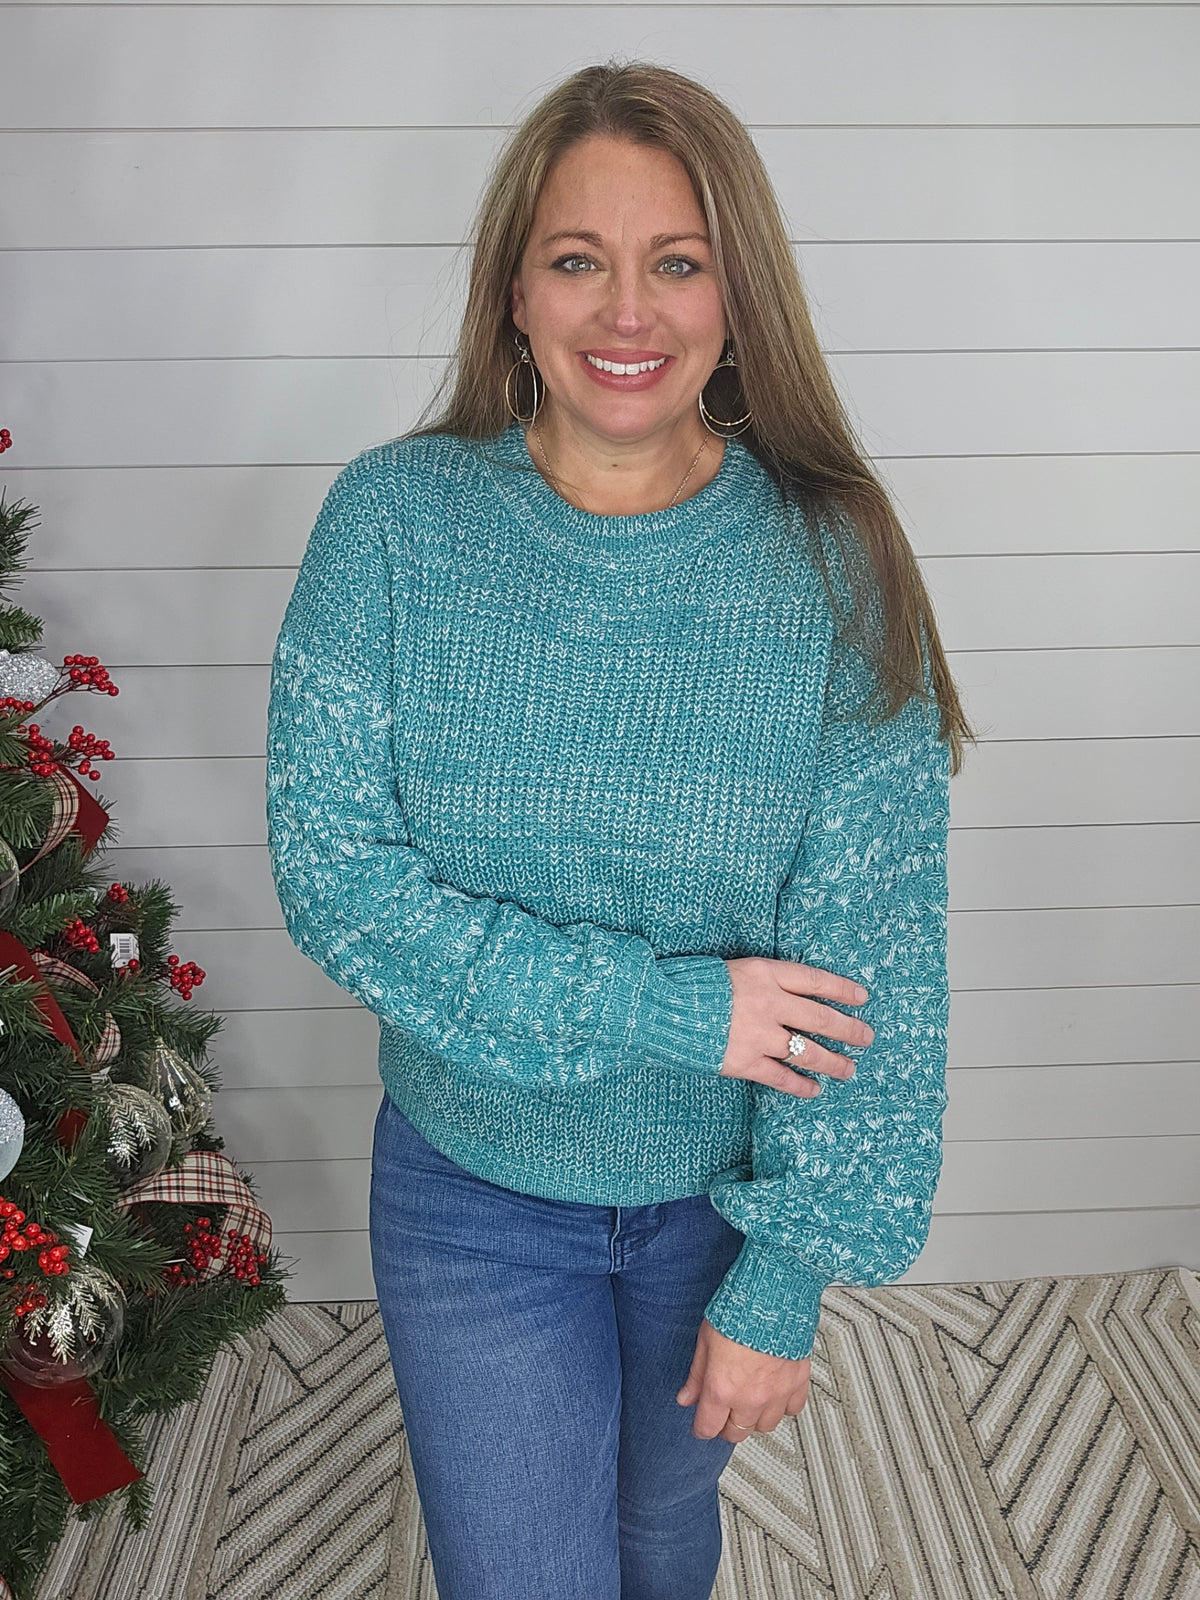 SEA GREEN CABLE KNIT DROP SHOULDER SWEATER